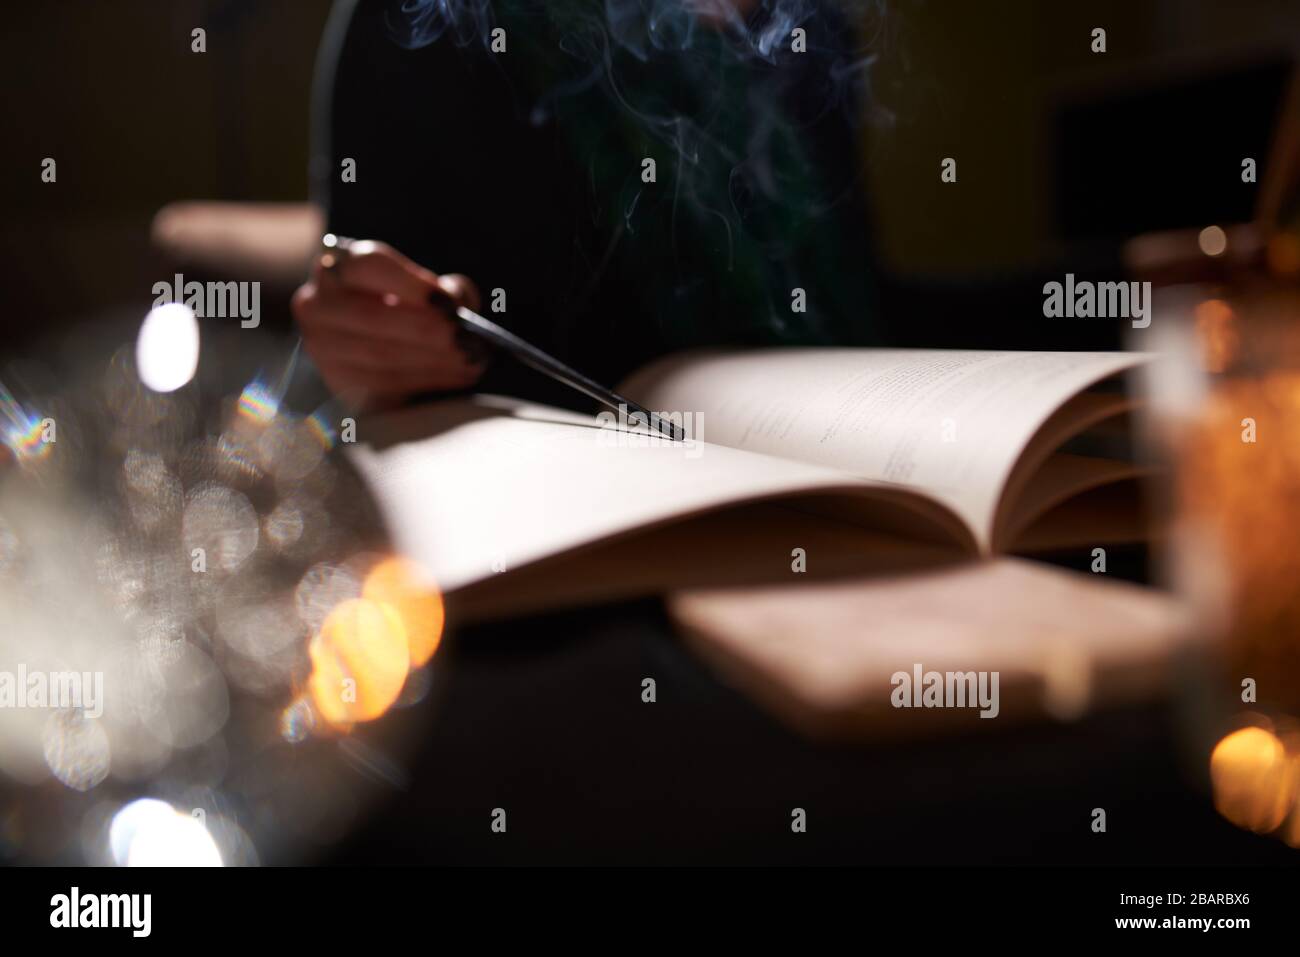 Fortune teller with open book of predictions on table with candles, close-up Stock Photo